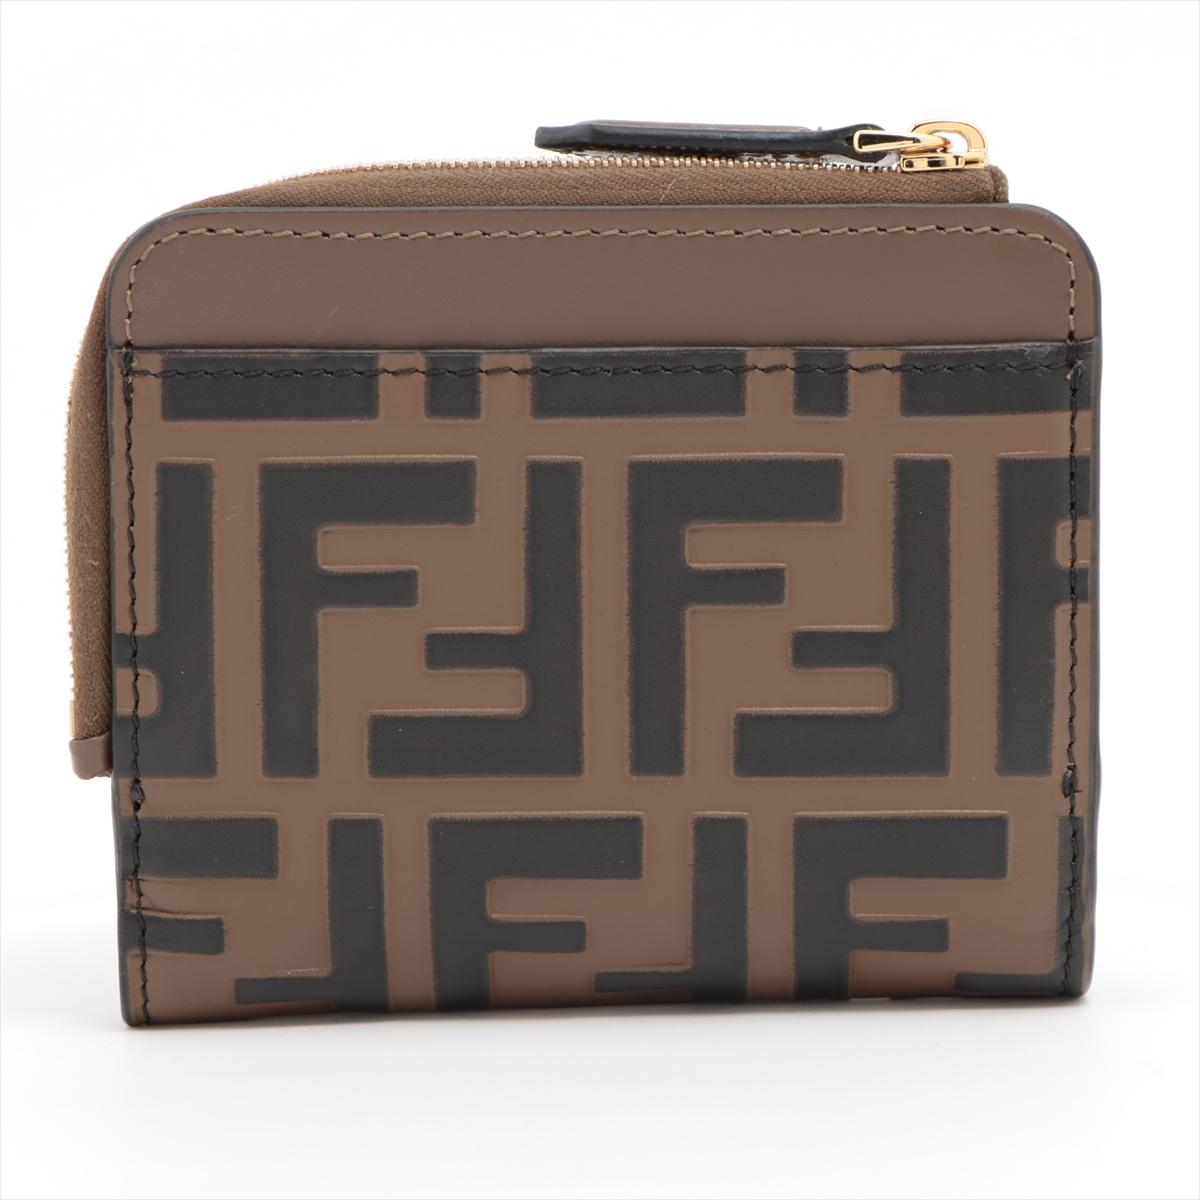 Fendi FF Iterlocking Logo Leather Wallet Brown In Good Condition For Sale In Indianapolis, IN